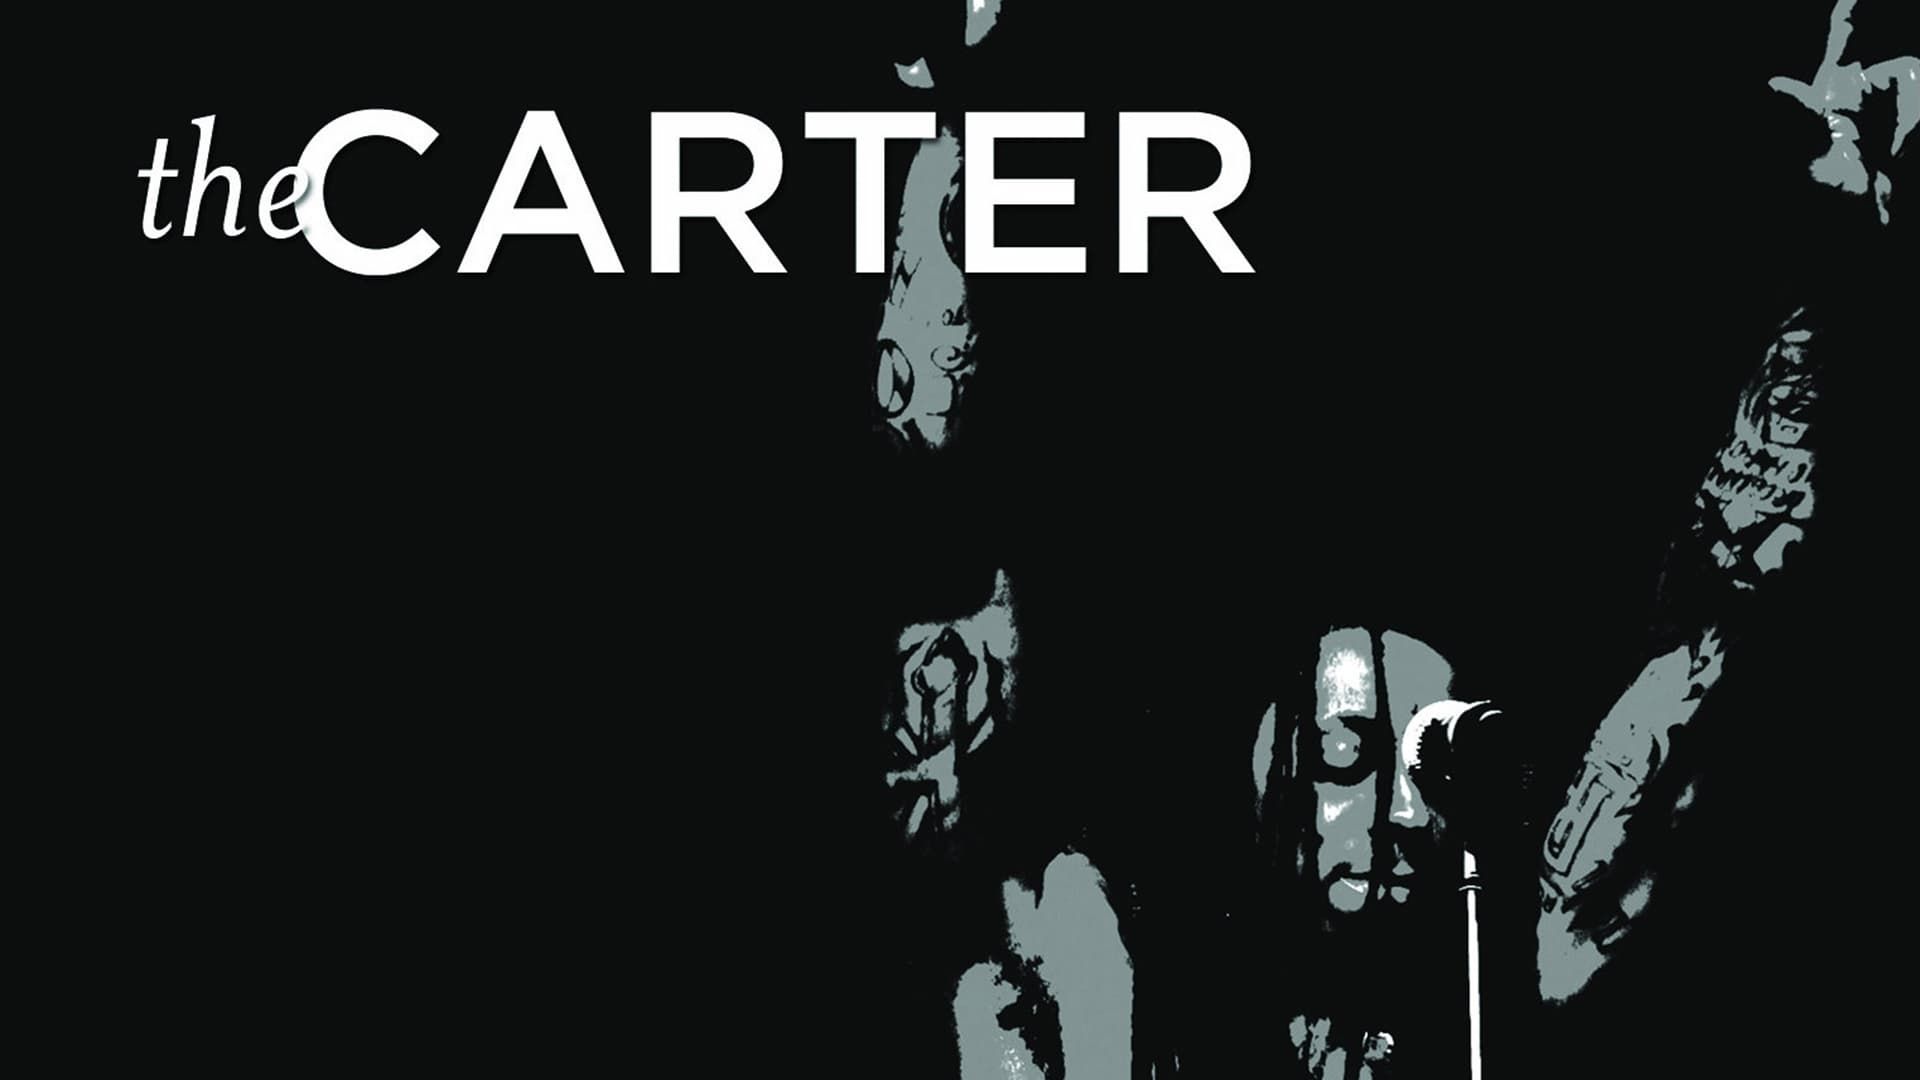 The Carter background